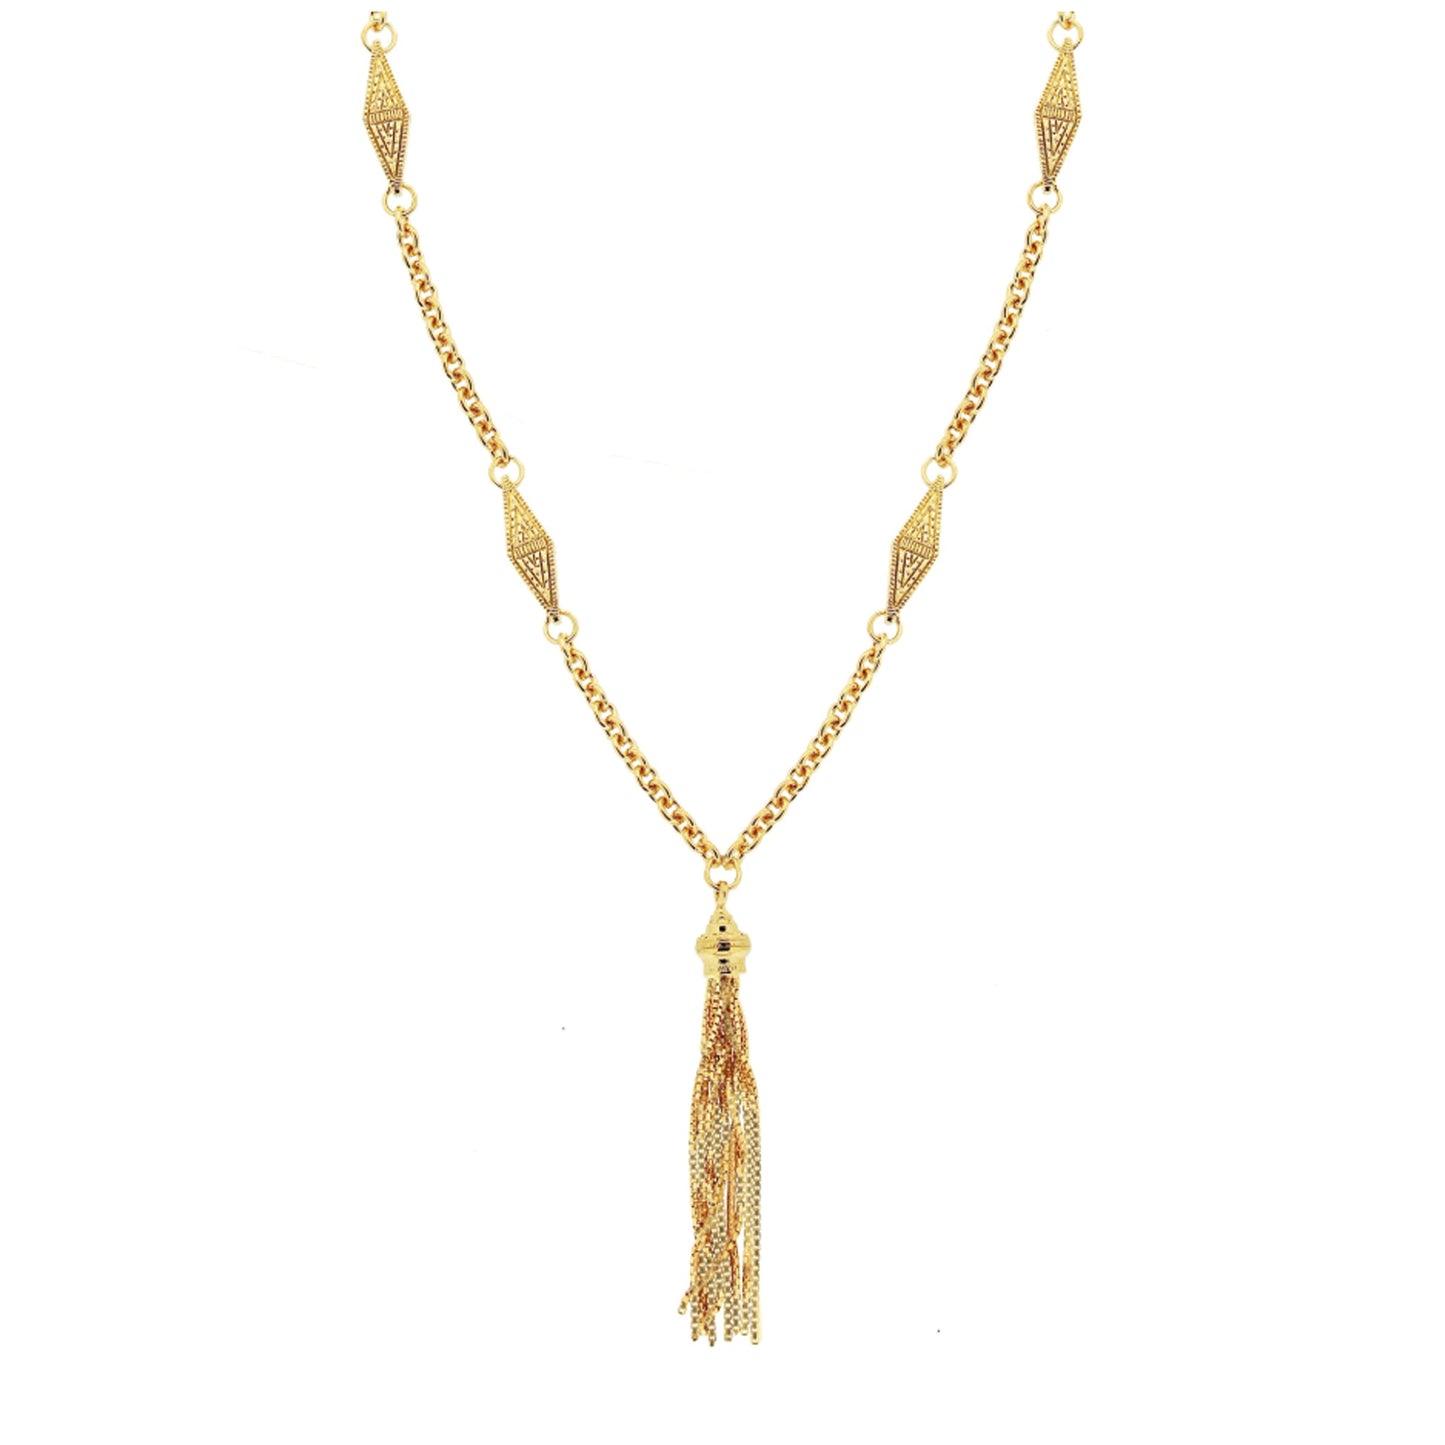 25" Yellow Gold Diamond Shaped Stations with 2" Extender Necklace